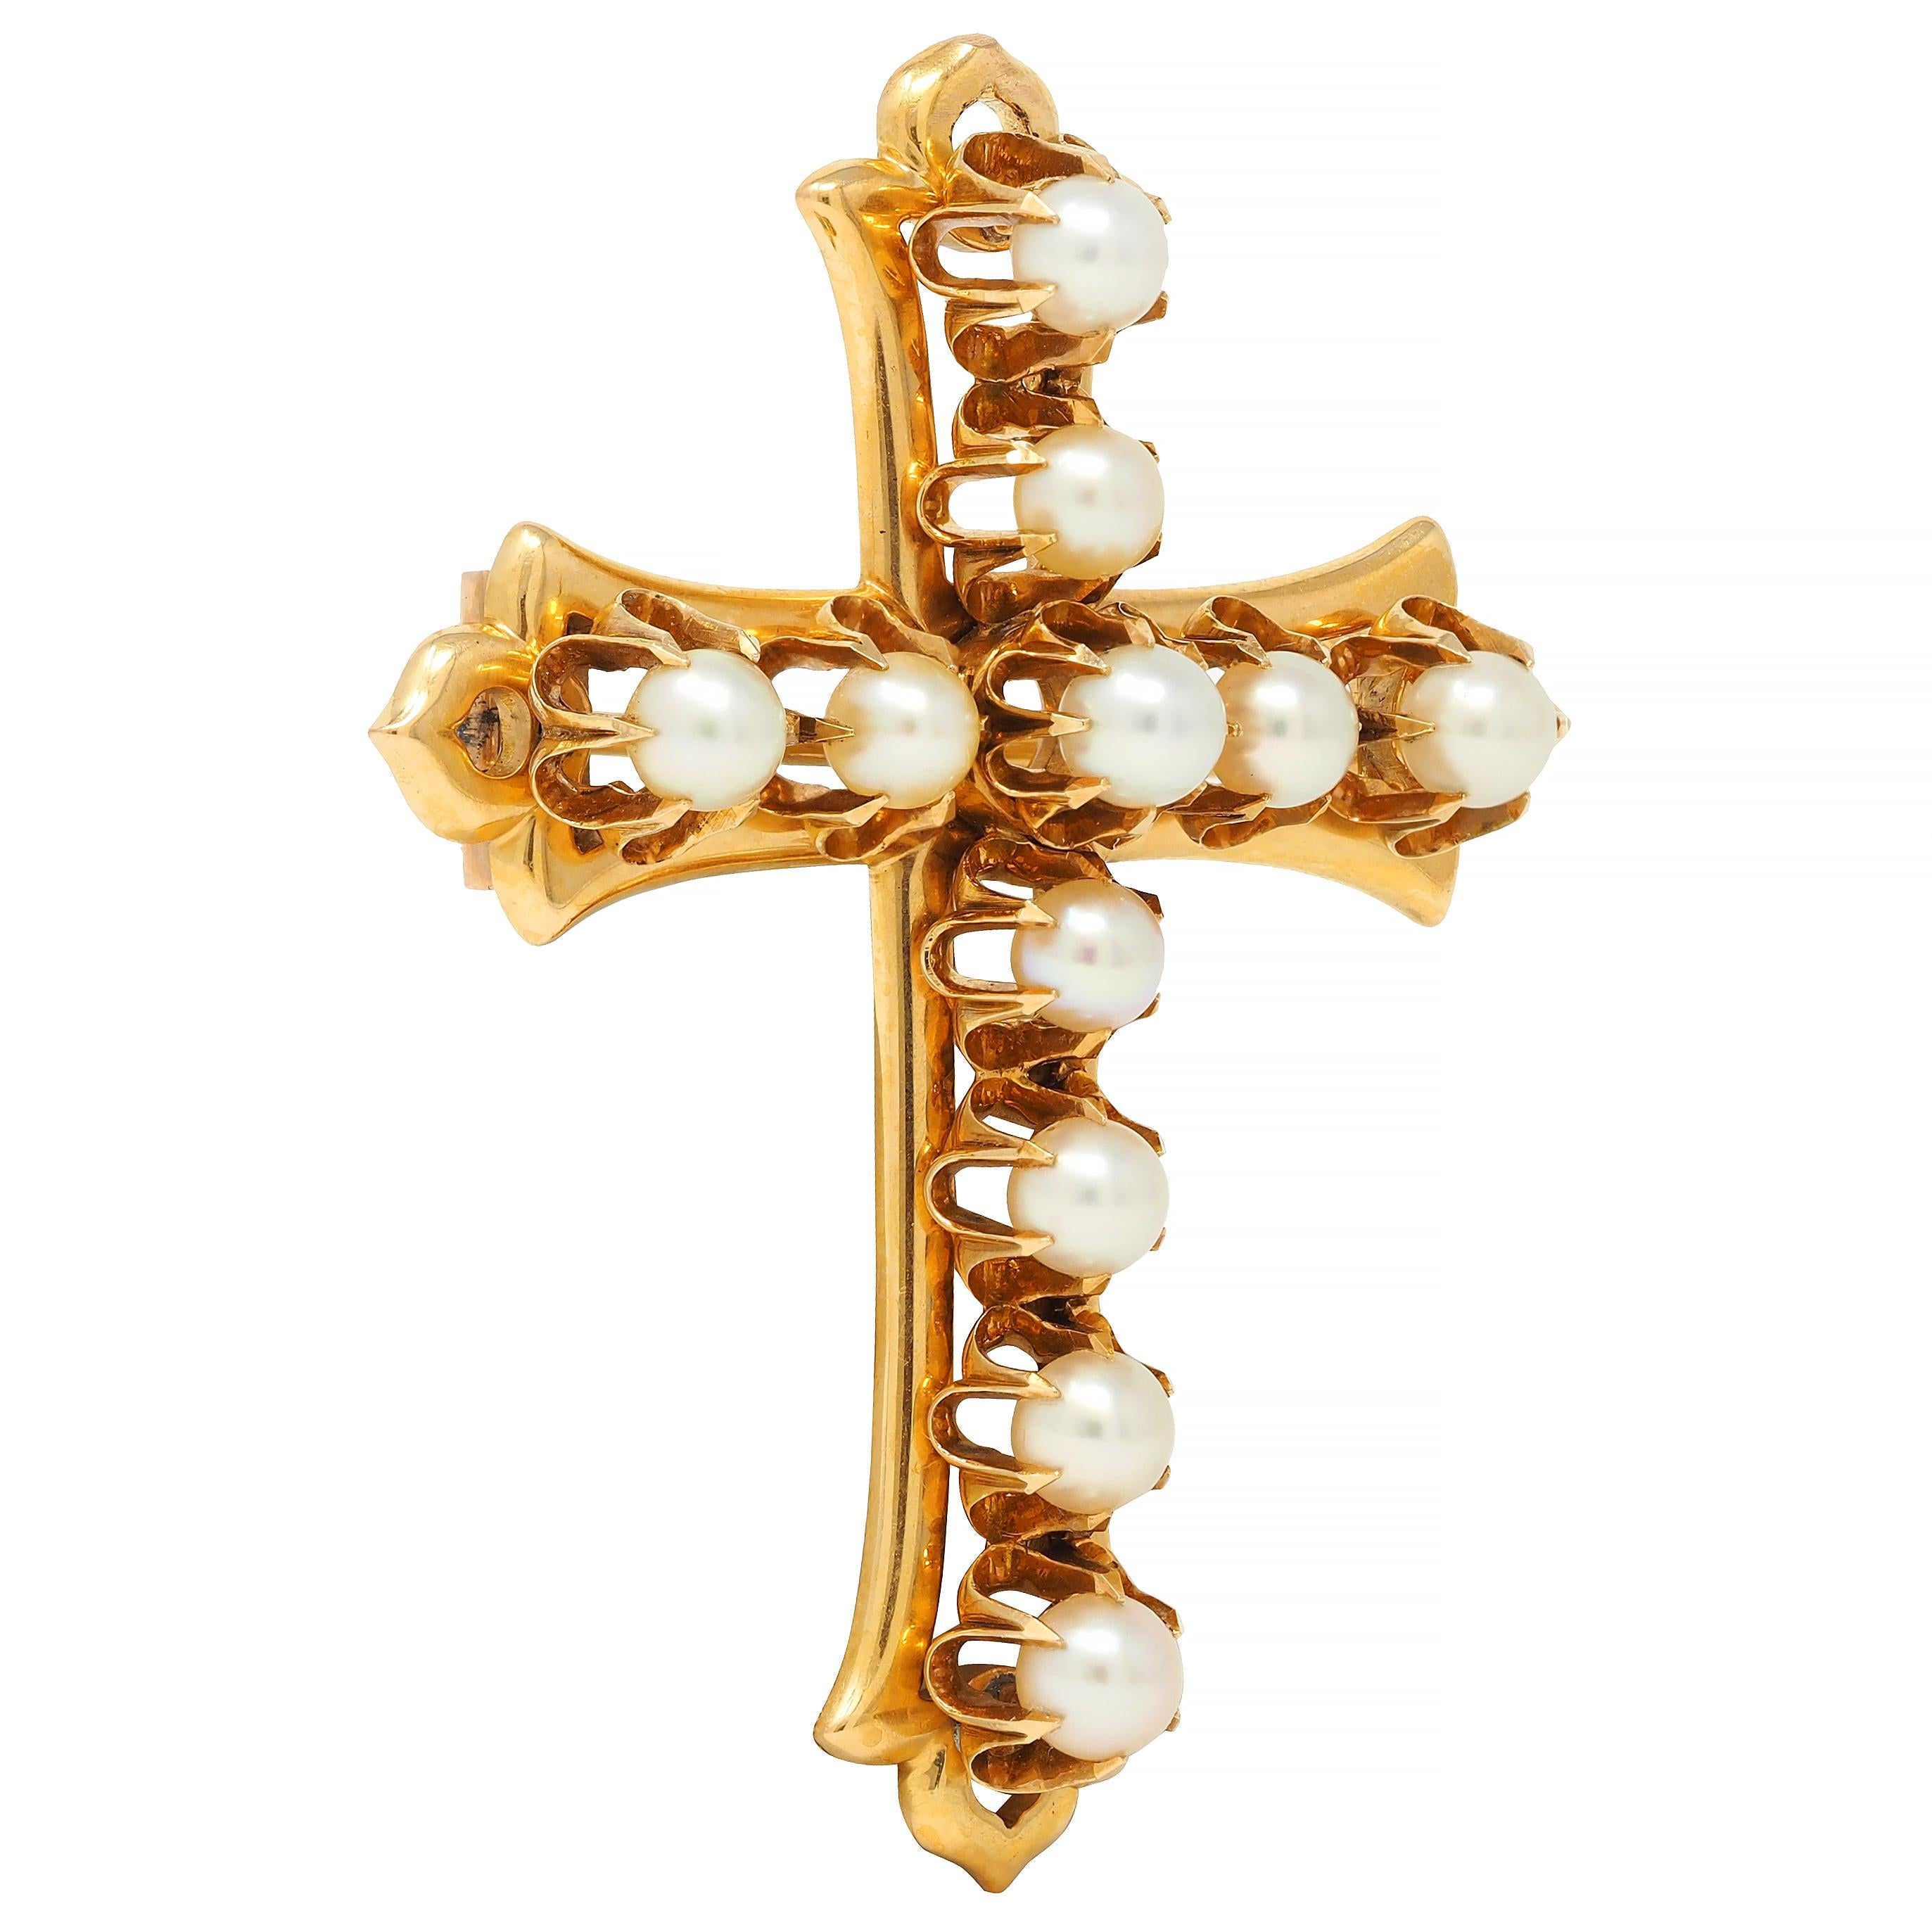 Designed as a pierced cross form with flaring fleur-de-lis motif terminals 
Featuring round pearls prong set in belcher mounts throughout
Gray to cream in body color with strong iridescence
Ranging in size from 4.0 to 4.3 mm 
Completed by hinged